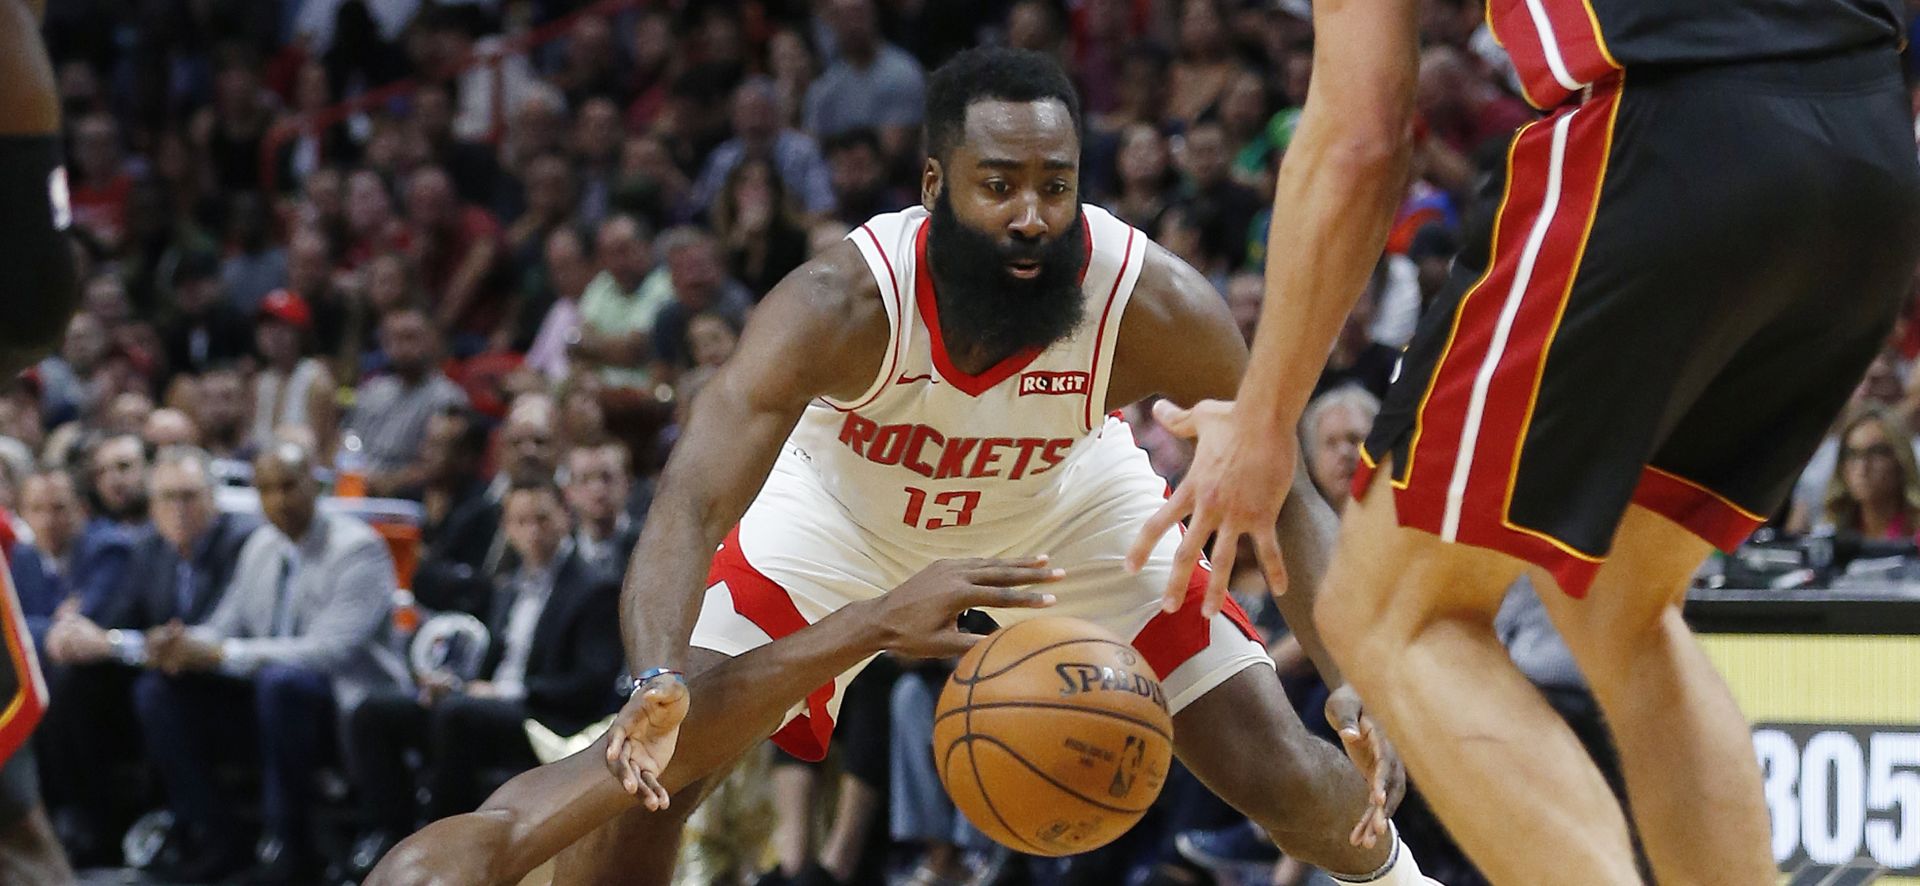 epaselect epa07970745 Houston Rockets James Harden (yop) defends Miami Heat guard Jimmy Butler (bottom) during the NBA basketball game between the Miami Heat and the Houston Rockets at the AmericanAirlines Arena in Miami, Florida, USA 03 November 2019.  EPA/RHONA WISE  SHUTTERSTOCK OUT